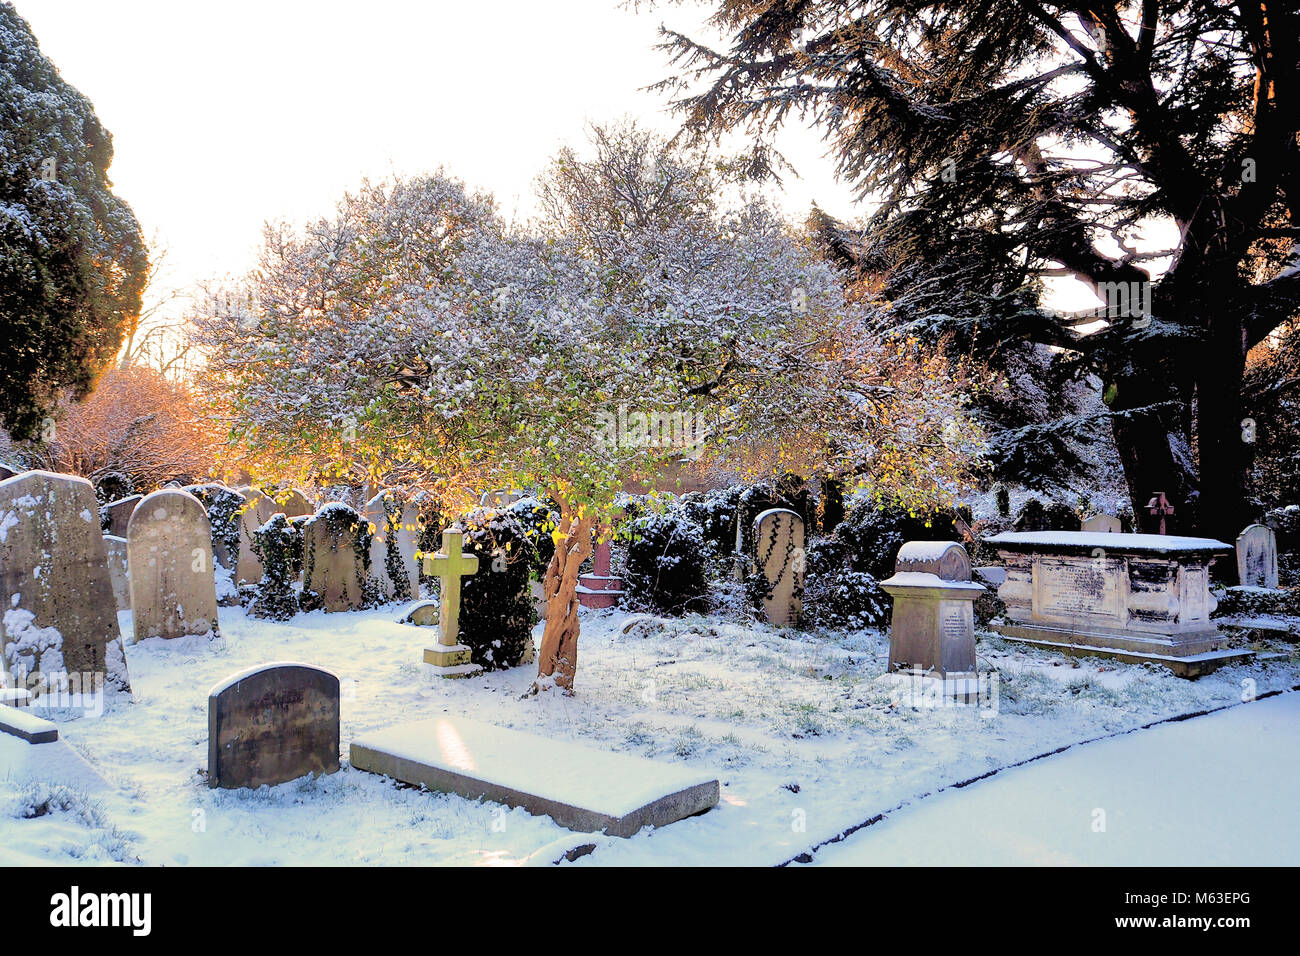 London, UK. 28th Feb, 2018. UK Weather: Central London was blanketed in snow as the cold weather front swept across South East England. Brompton Cemetery © Brian Minkoff / Alamy Live News Stock Photo